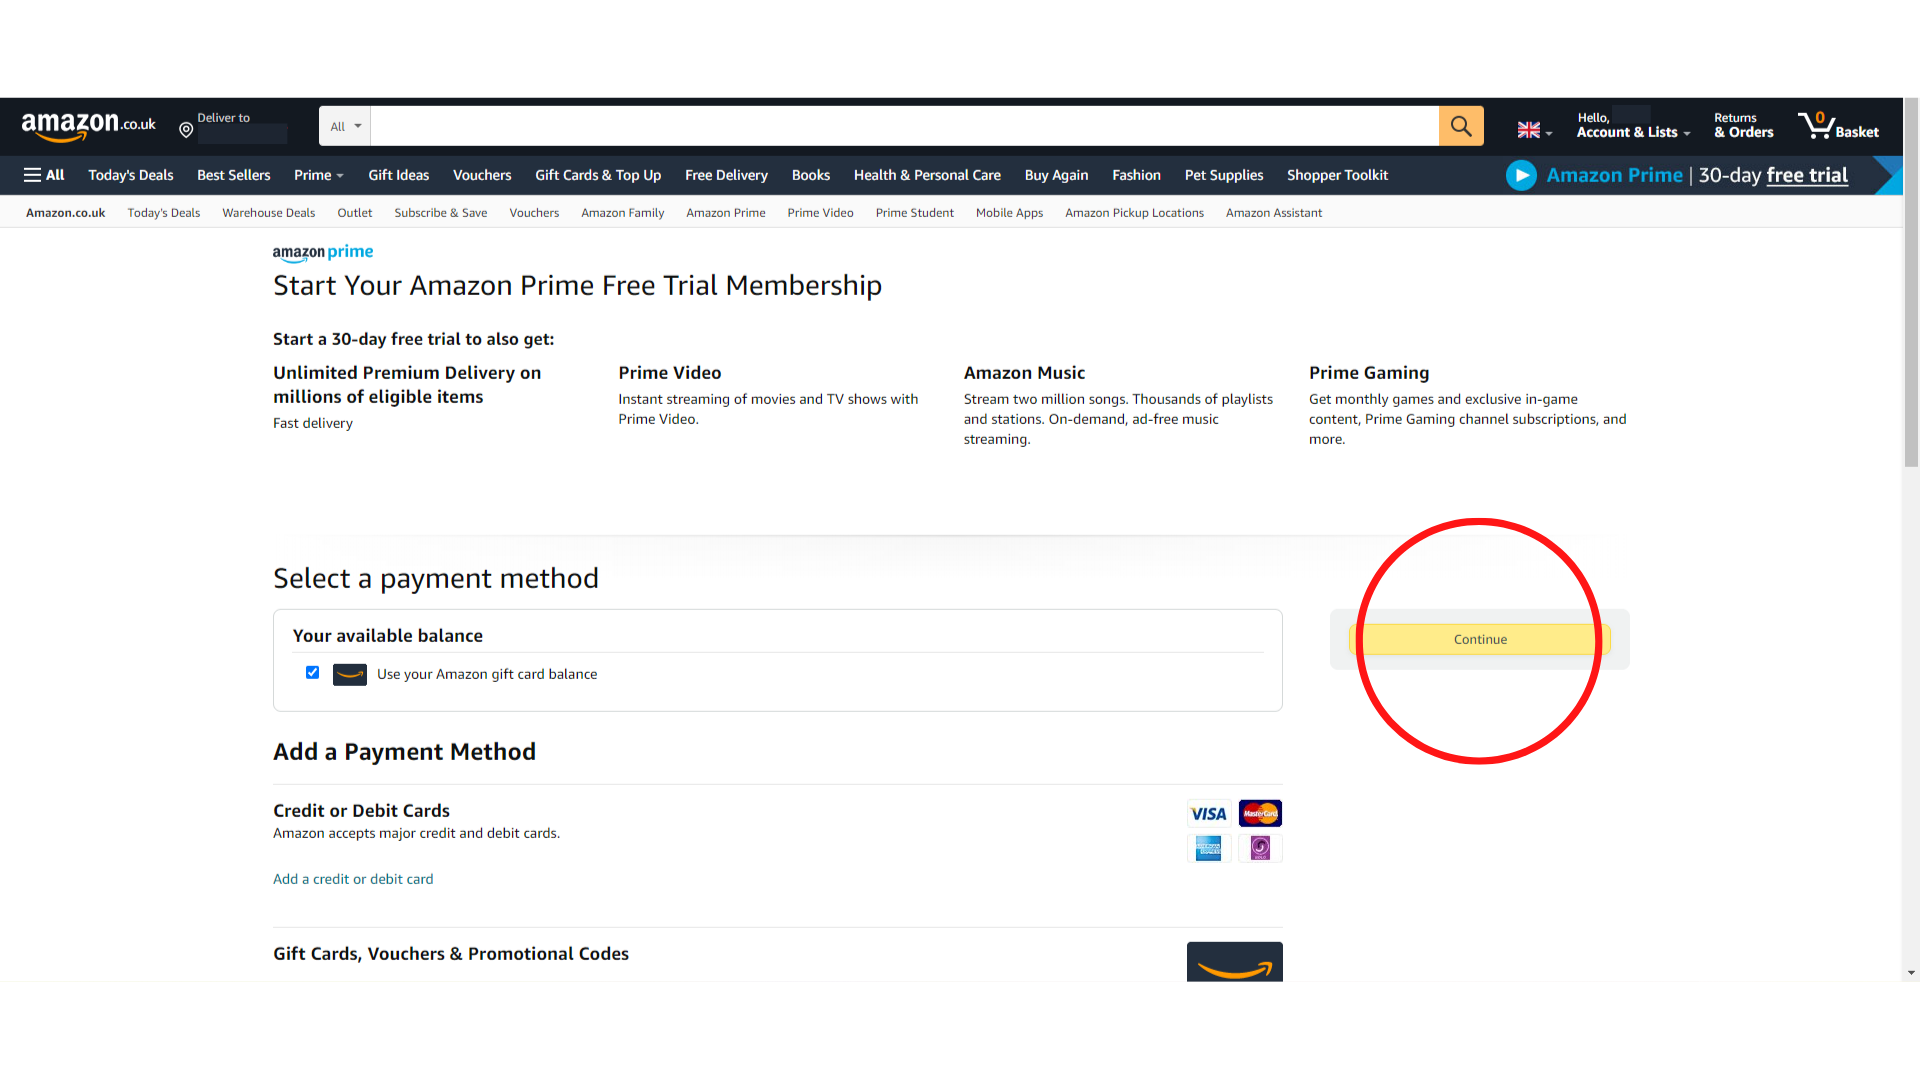 Put your credit/debit card details in to sign up to Amazon Prime